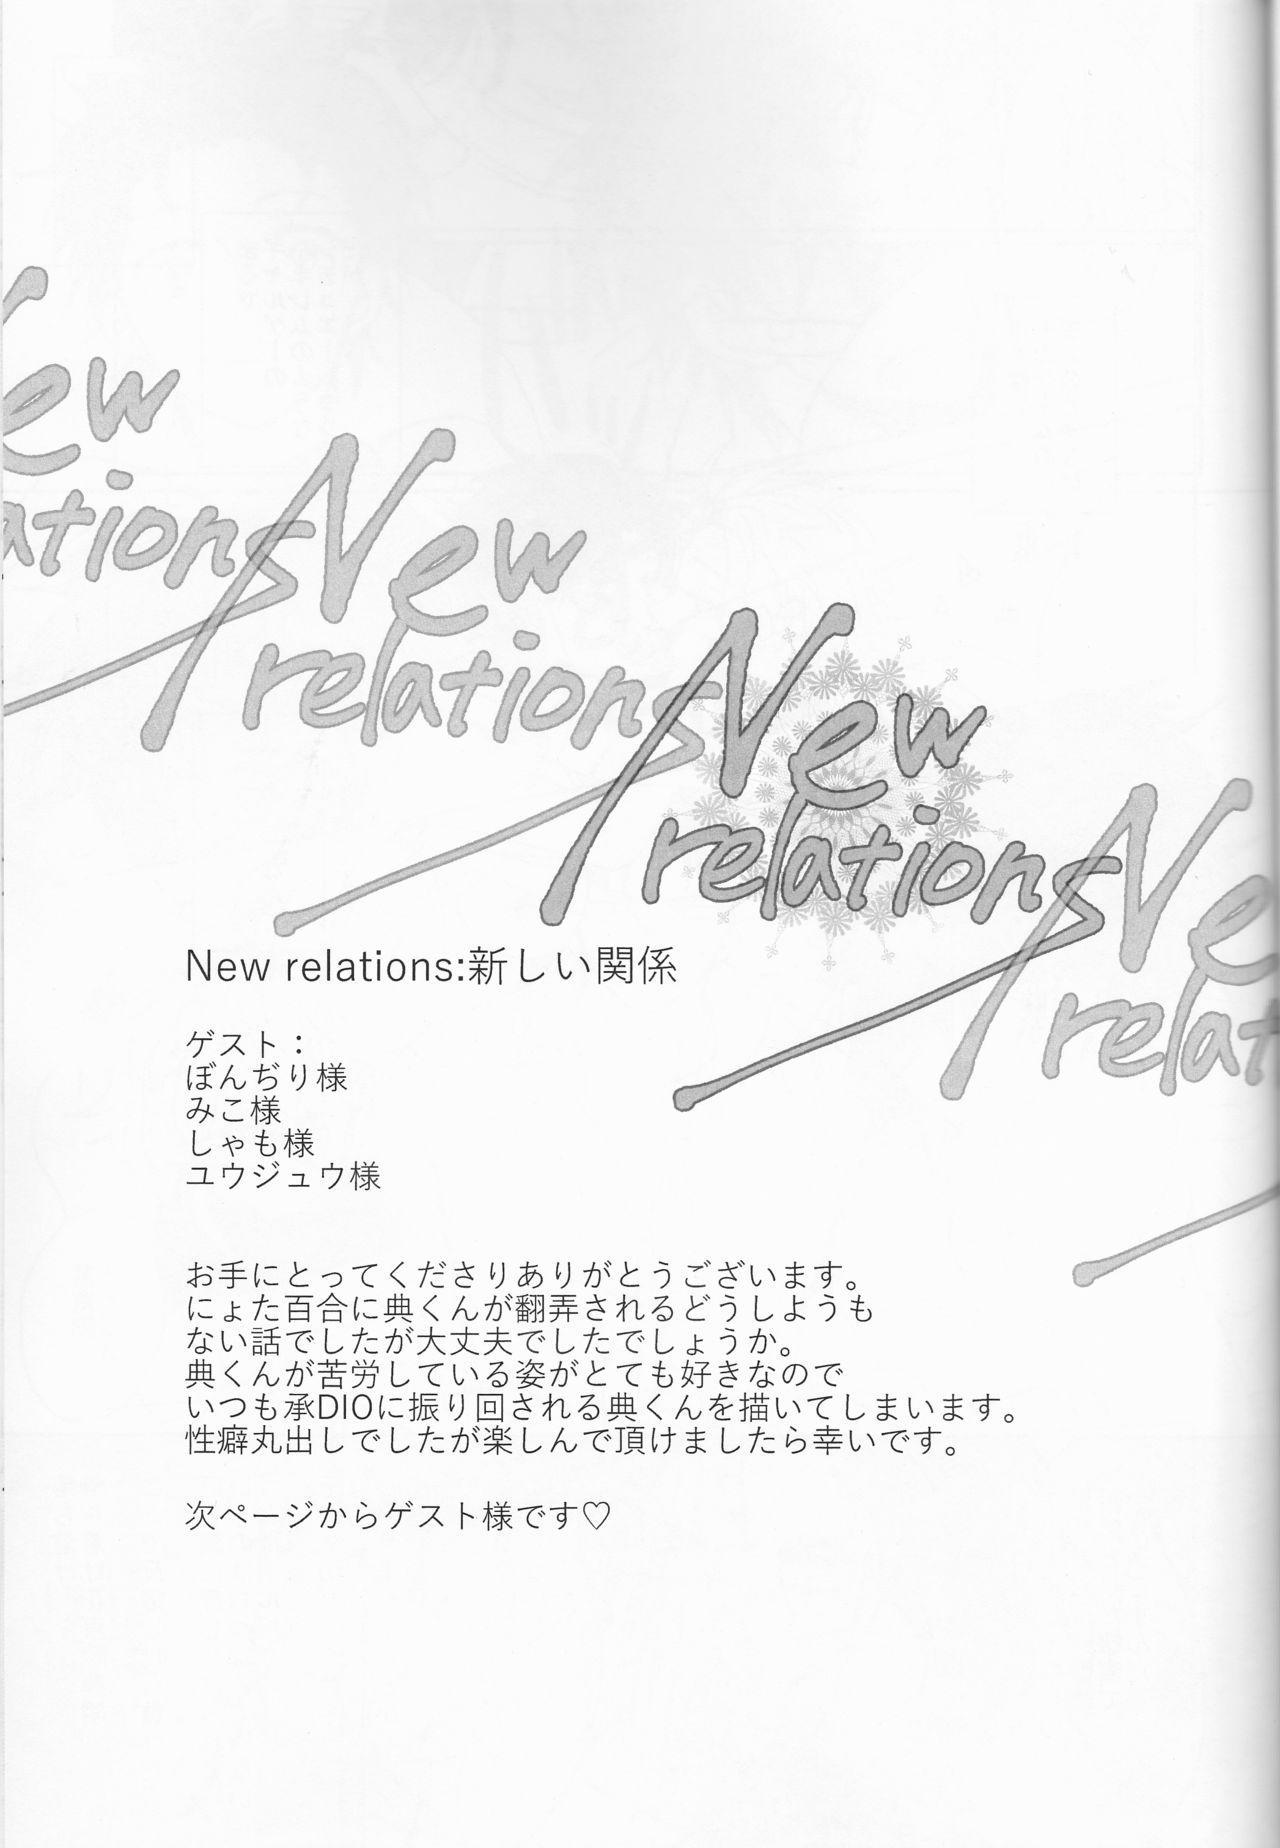 New relations 20